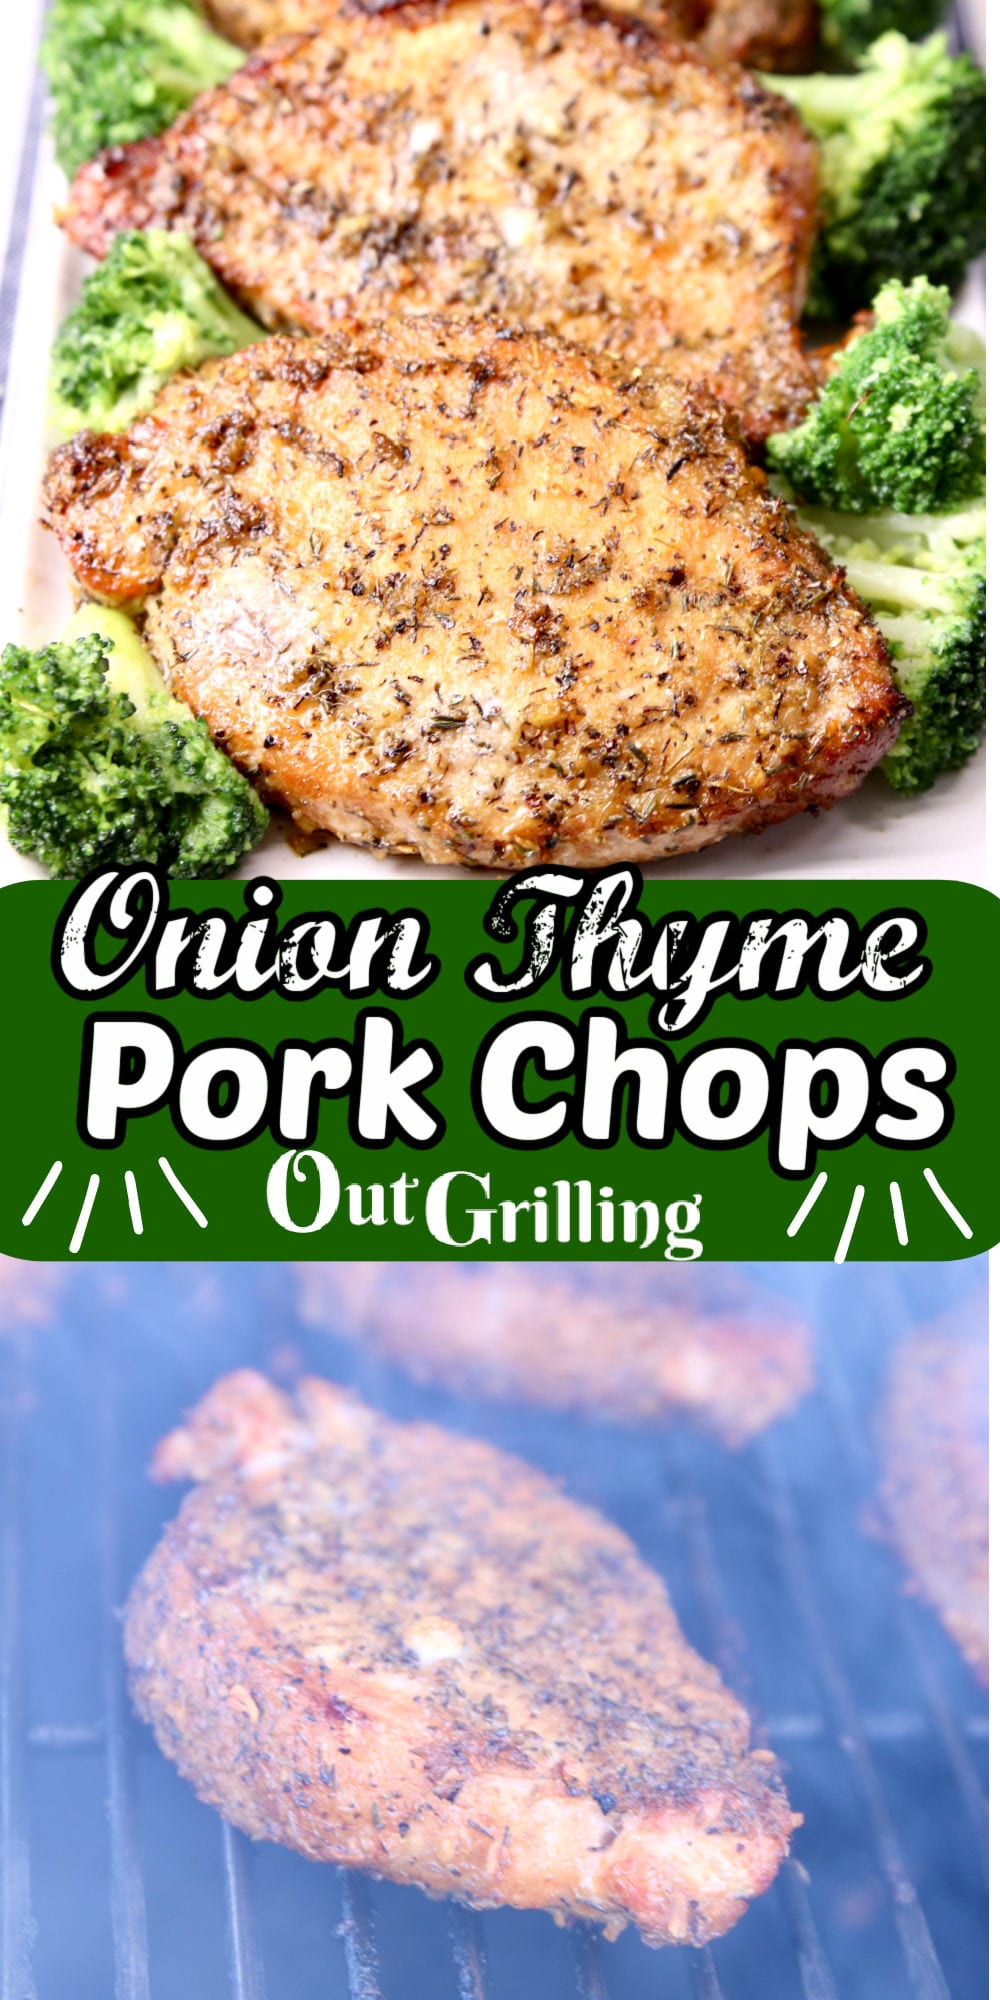 Grilled Onion Thyme Pork Chops Recipe - Out Grilling